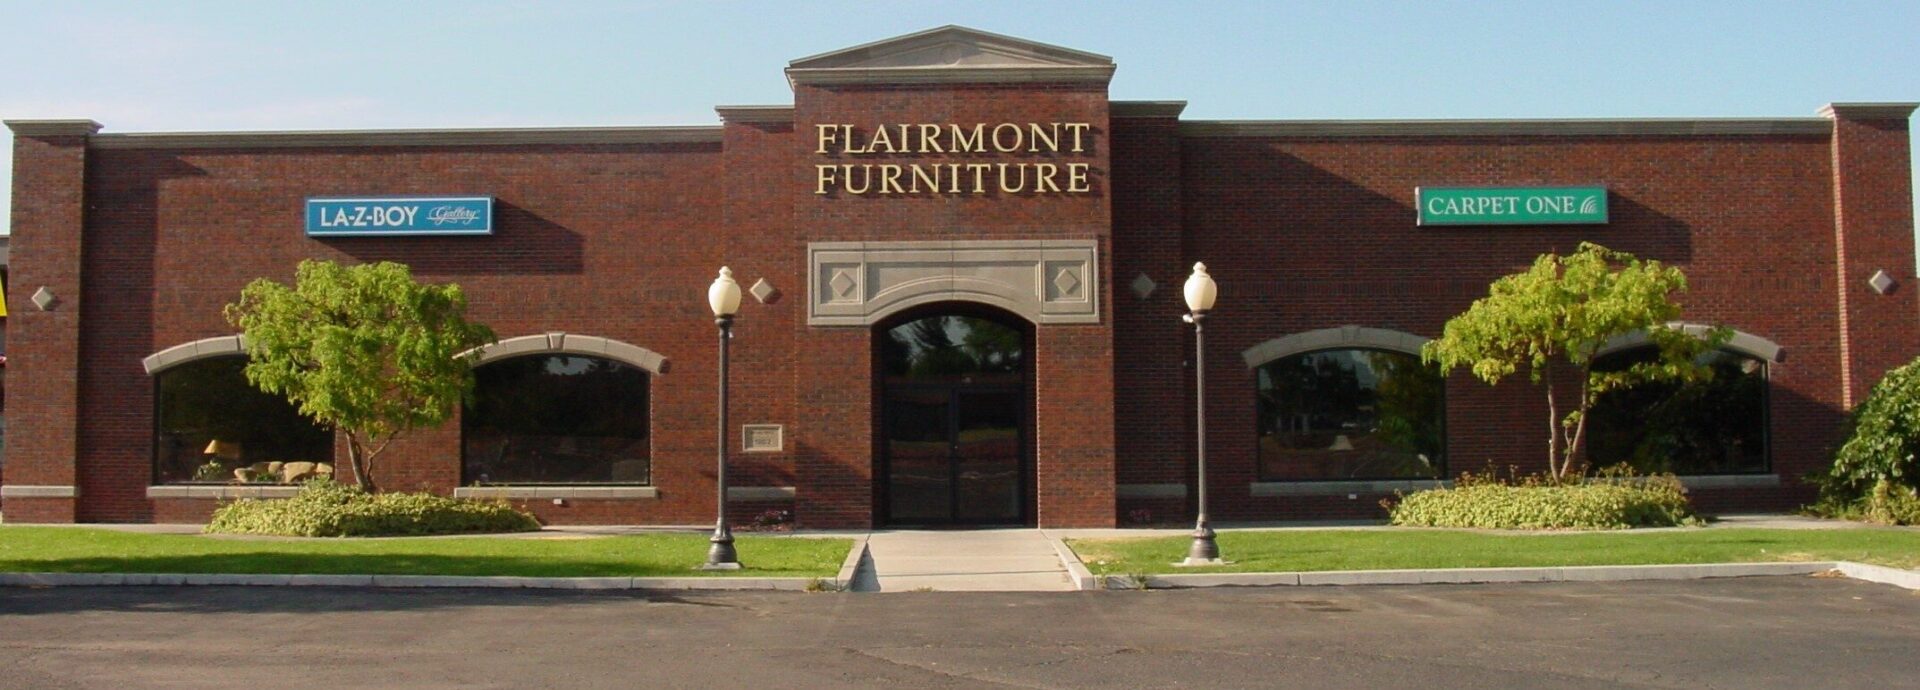 flairmont store front